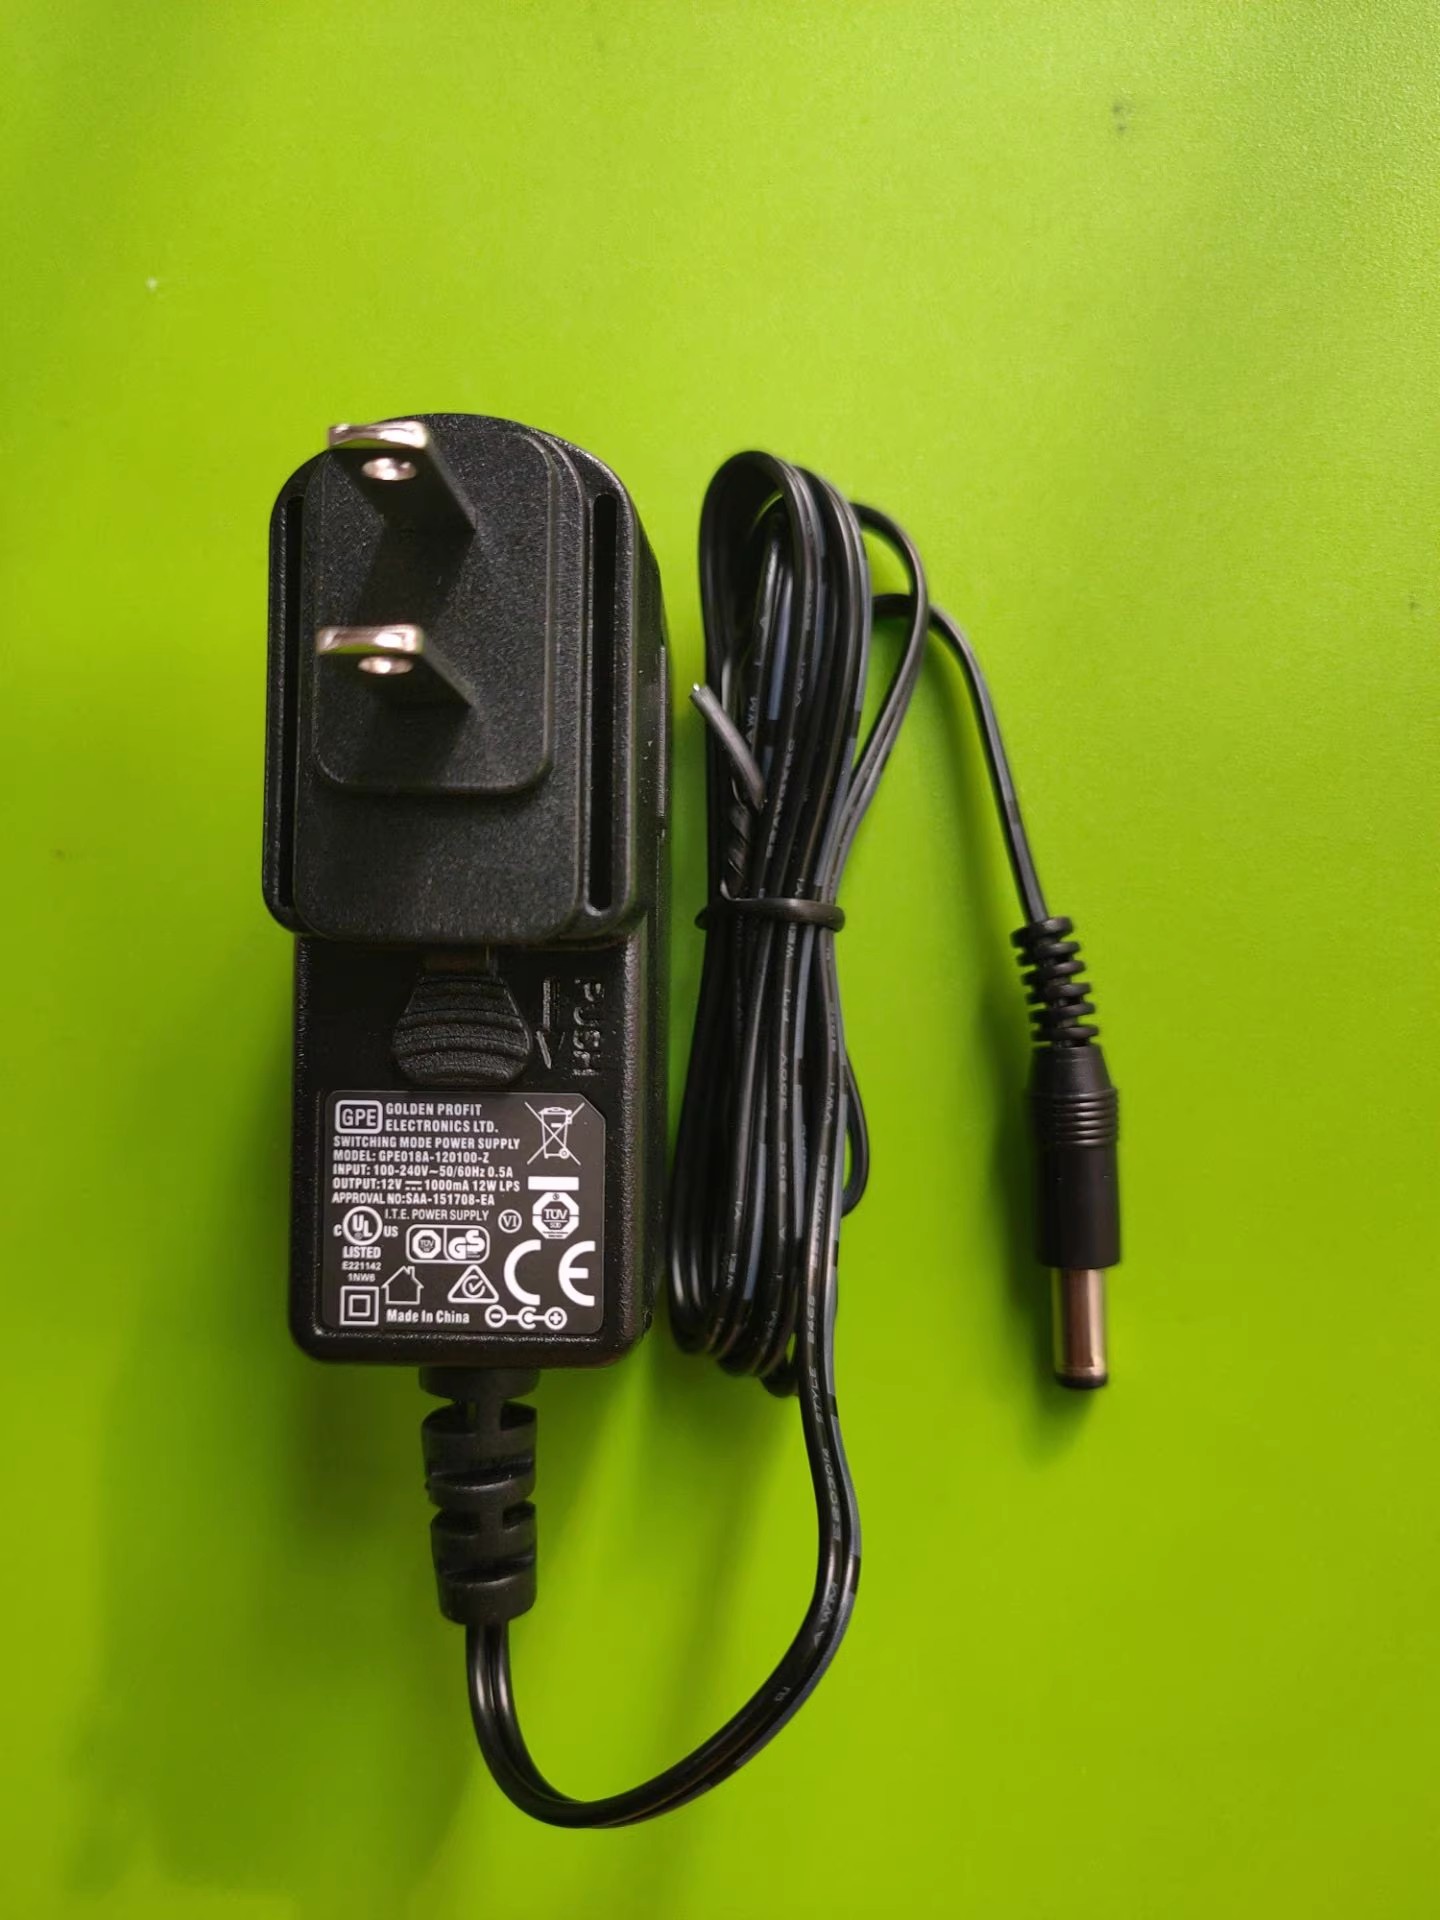 *Brand NEW*GPE 12V 1A AC DC ADAPTHE GPE018A-120100-Z POWER Supply